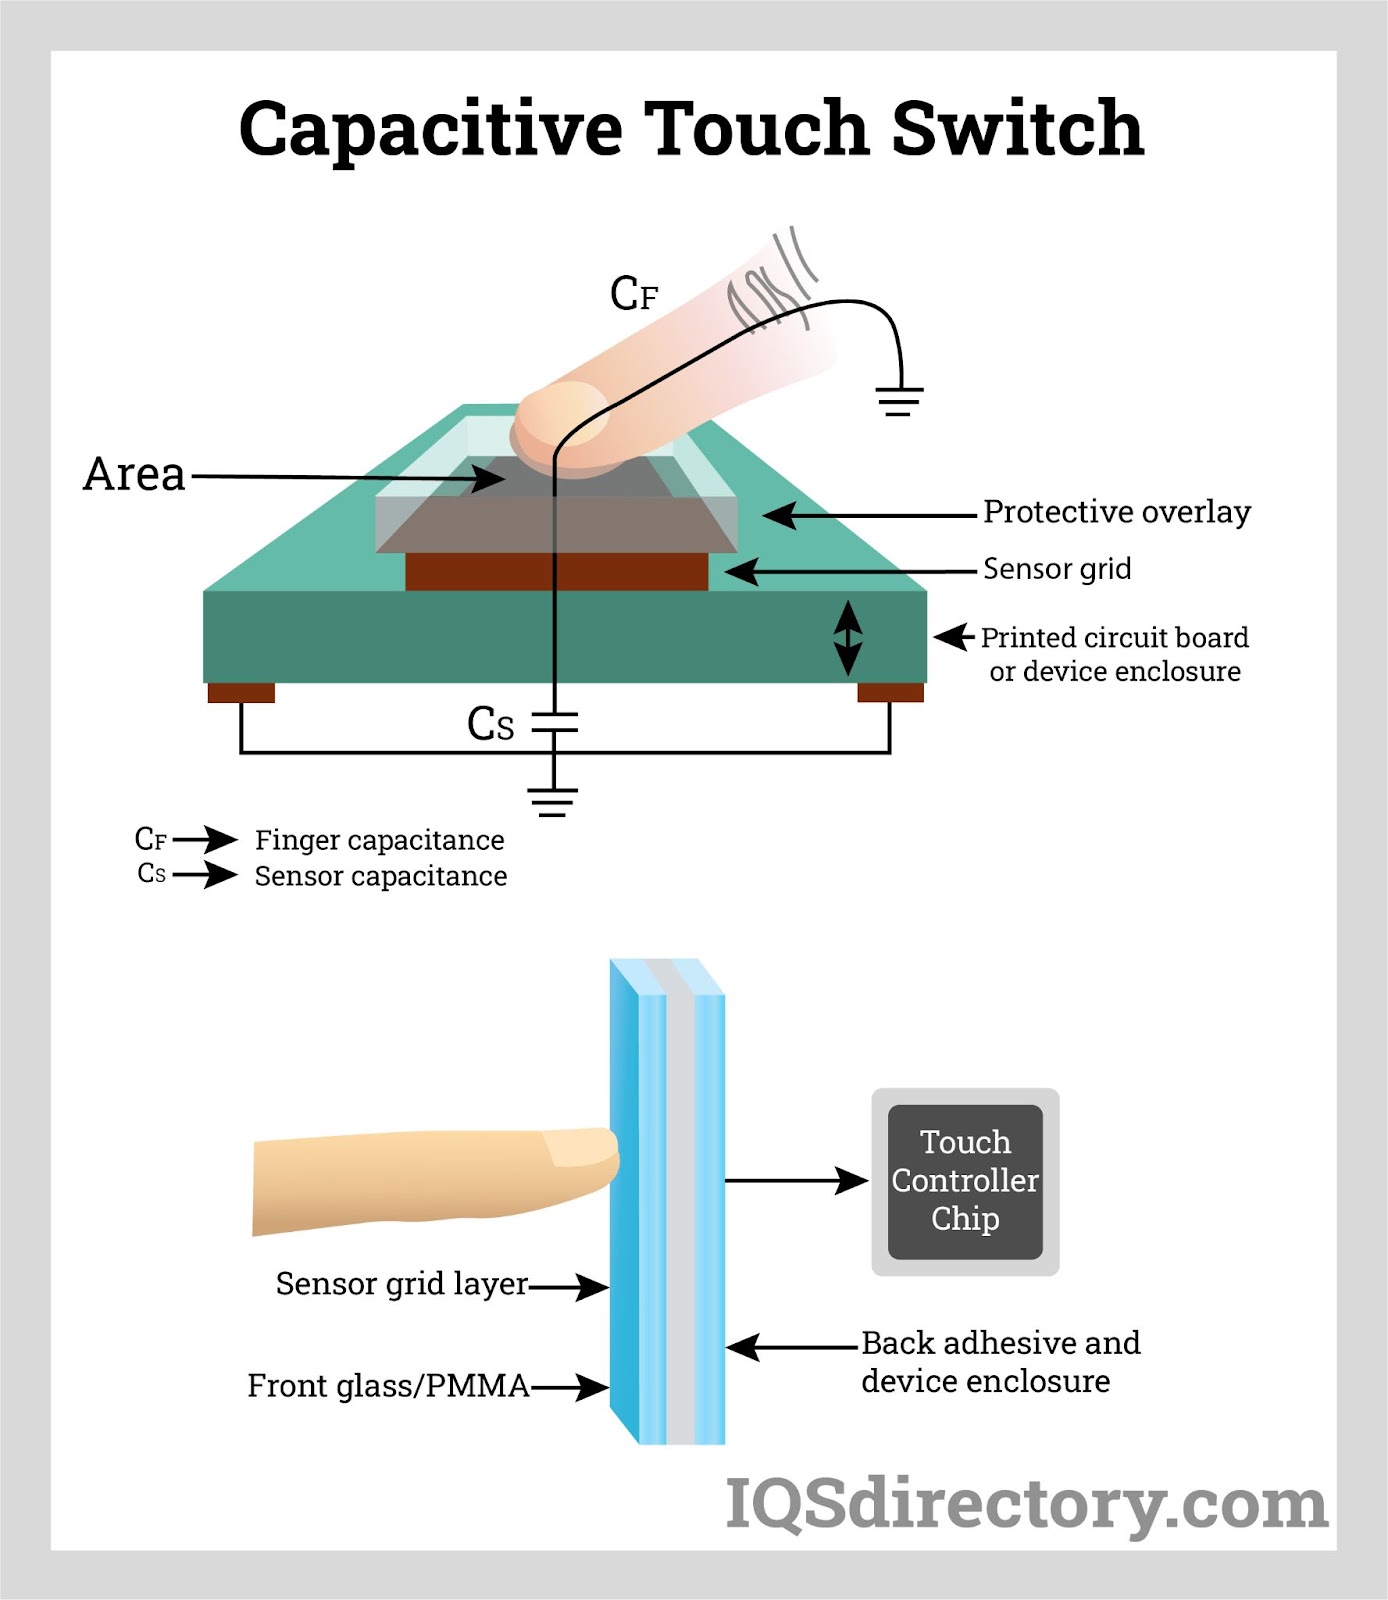 Capacitive Touch Switch